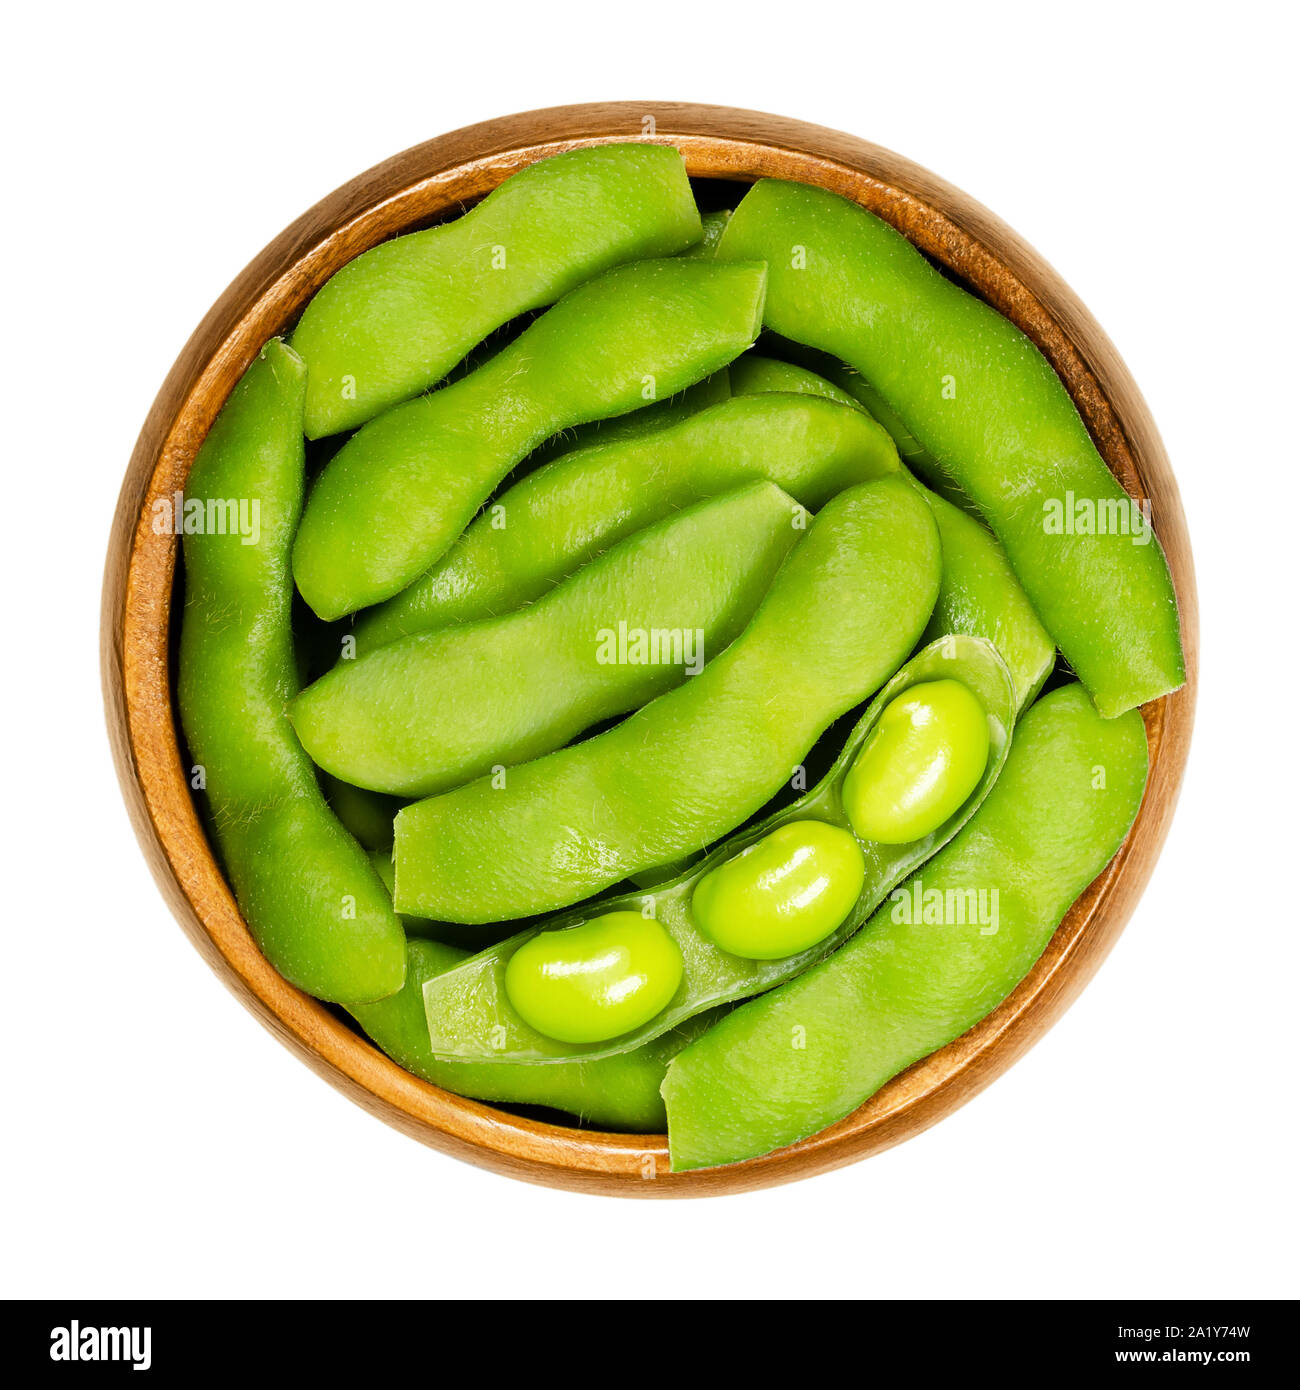 Green soybeans in the pod, edamame, in wooden bowl. Unripe soya beans, also Maodou. Glycine max, a legume, edible after cooking. Protein source. Stock Photo